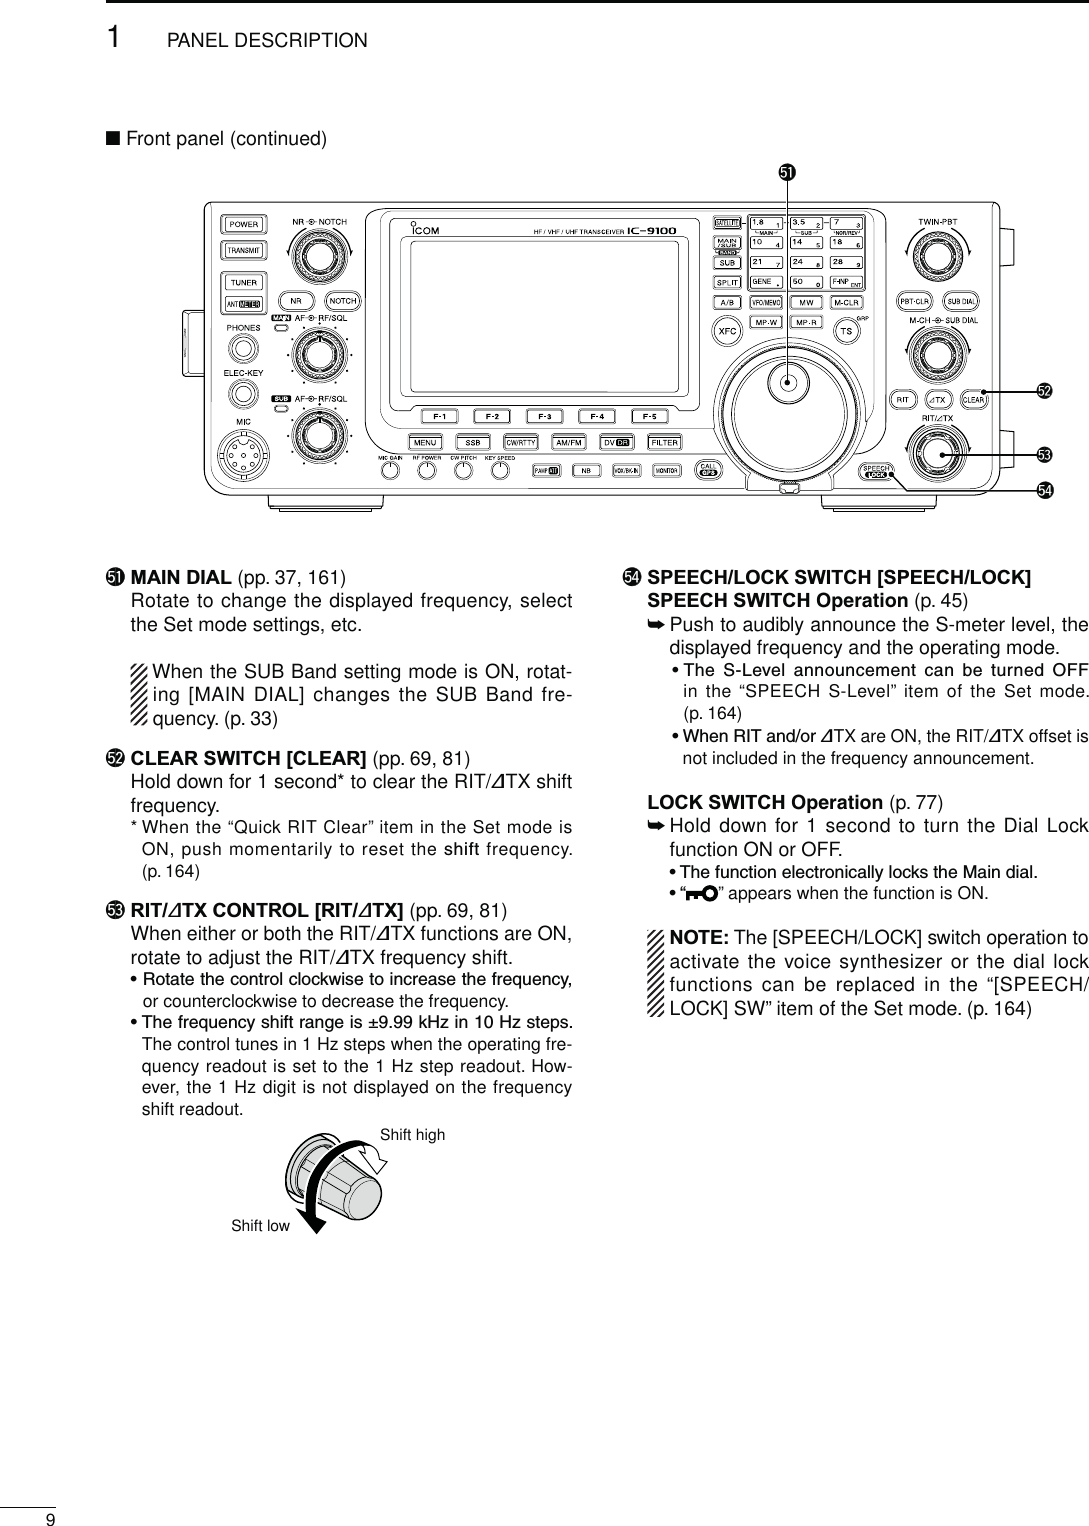 %1 MAIN DIAL (pp. 37, 161)  Rotate to change the displayed frequency, select the Set mode settings, etc.When the SUB Band setting mode is ON, rotat-ing [MAIN DIAL] changes the SUB Band fre-quency. (p. 33)%2 CLEAR SWITCH [CLEAR] (pp. 69, 81)  Hold down for 1 second* to clear the RIT/∂TX shift frequency. * When the “Quick RIT Clear” item in the Set mode is ON, push momentarily to reset the shift frequency. (p. 164)%3 RIT/∂TX CONTROL [RIT/∂TX] (pp. 69, 81)  When either or both the RIT/∂TX functions are ON, rotate to adjust the RIT/∂TX frequency shift.s2OTATETHECONTROLCLOCKWISETOINCREASETHEFREQUENCYor counterclockwise to decrease the frequency.s4HEFREQUENCYSHIFTRANGEISÒK(ZIN(ZSTEPSThe control tunes in 1 Hz steps when the operating fre-quency readout is set to the 1 Hz step readout. How-ever, the 1 Hz digit is not displayed on the frequency shift readout.Shift highShift low%4 SPEECH/LOCK SWITCH [SPEECH/LOCK]SPEECH SWITCH/PERATION(p. 45)±  Push to audibly announce the S-meter level, the displayed frequency and the operating mode.s4HE 3,EVEL ANNOUNCEMENT CAN BE TURNED /&amp;&amp;in the “SPEECH S-Level” item of the Set mode. (p. 164)s7HEN2)4ANDOR∂TX are ON, the RIT/∂TX offset is not included in the frequency announcement.LOCK SWITCH/PERATION(p. 77)±  Hold down for 1 second to turn the Dial Lock function ON or OFF. s4HEFUNCTIONELECTRONICALLYLOCKSTHE-AINDIAL sh” appears when the function is ON.NOTE: The [SPEECH/LOCK] switch operation to activate the voice synthesizer or the dial lock functions can be replaced in the “[SPEECH/LOCK] SW” item of the Set mode. (p. 164)N Front panel (continued)91PANEL DESCRIPTION%3%4%2%1